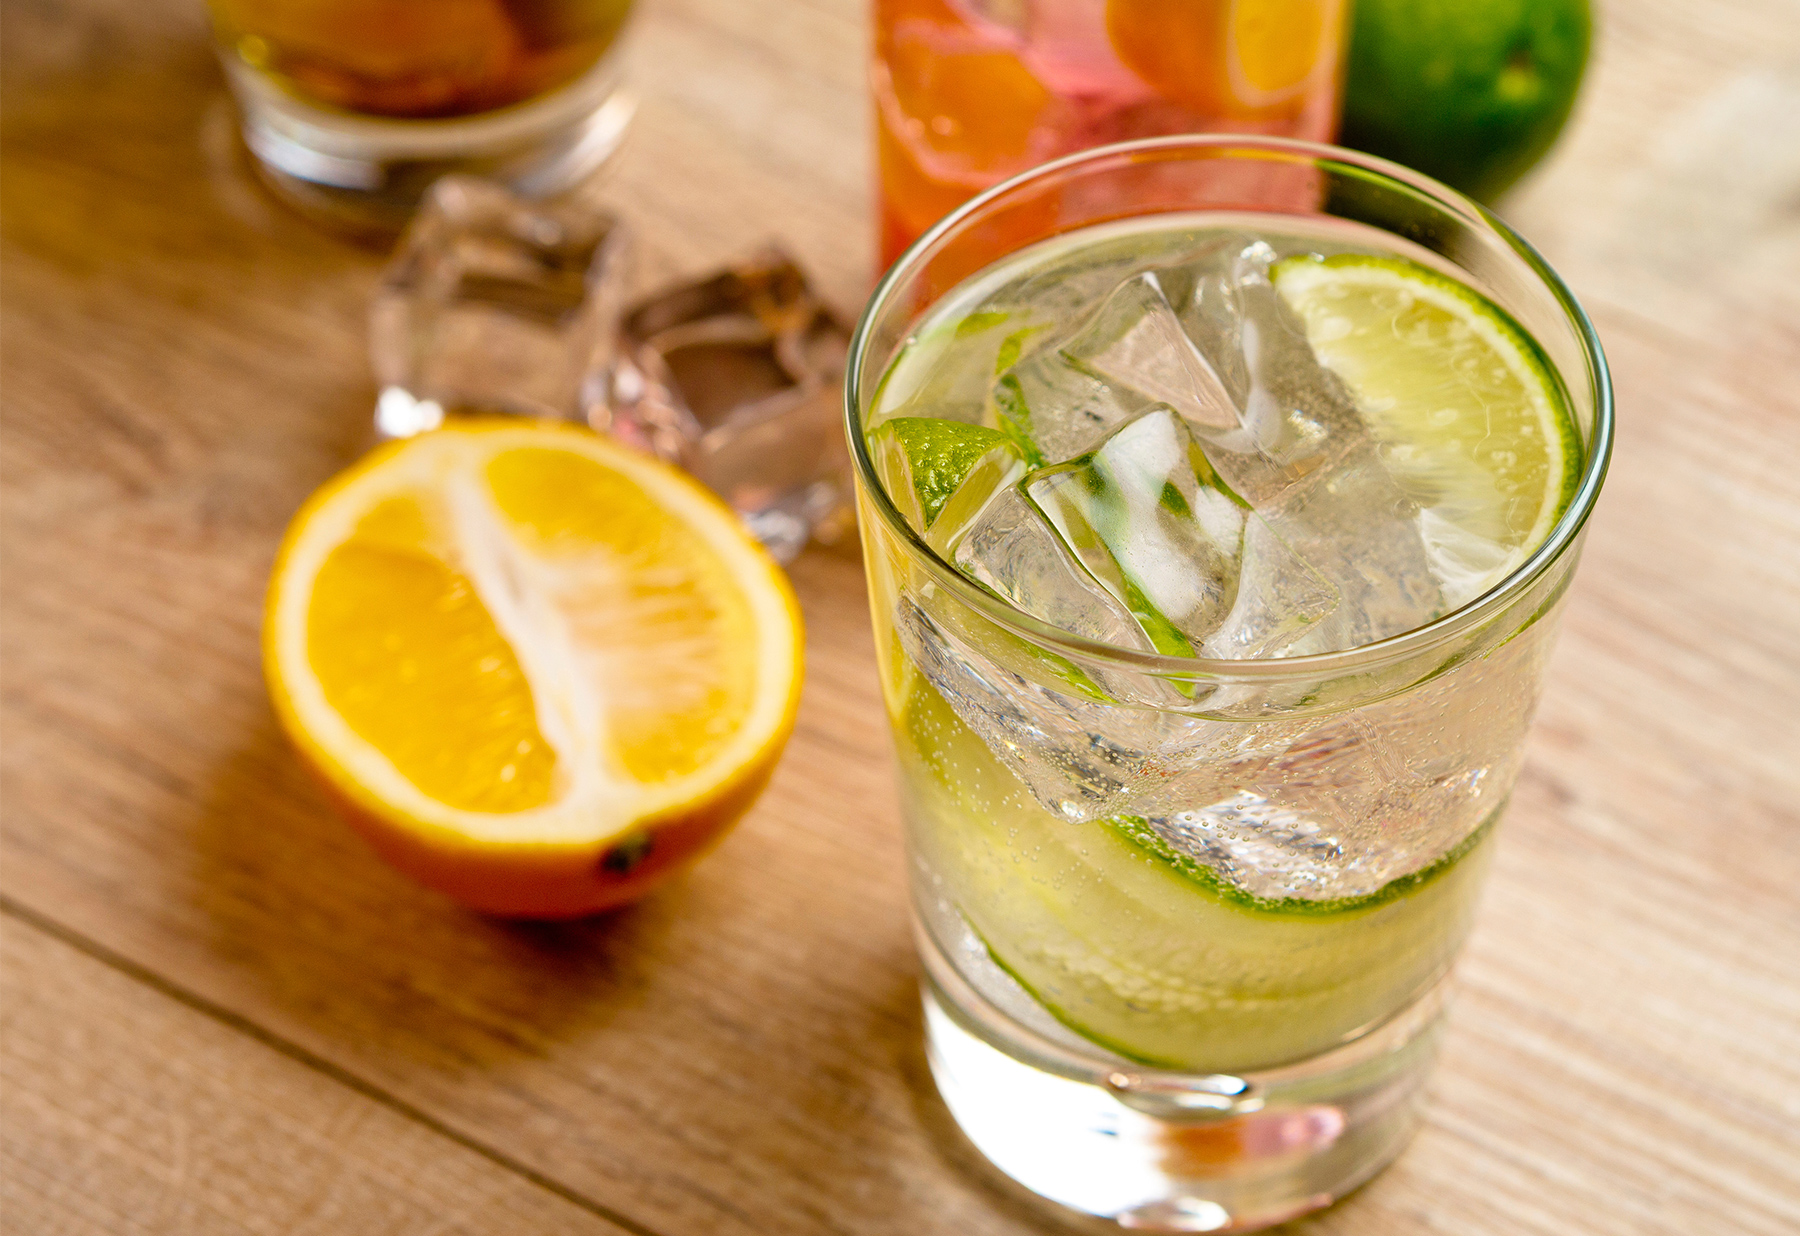 What side effects are associated with diet tonic water?